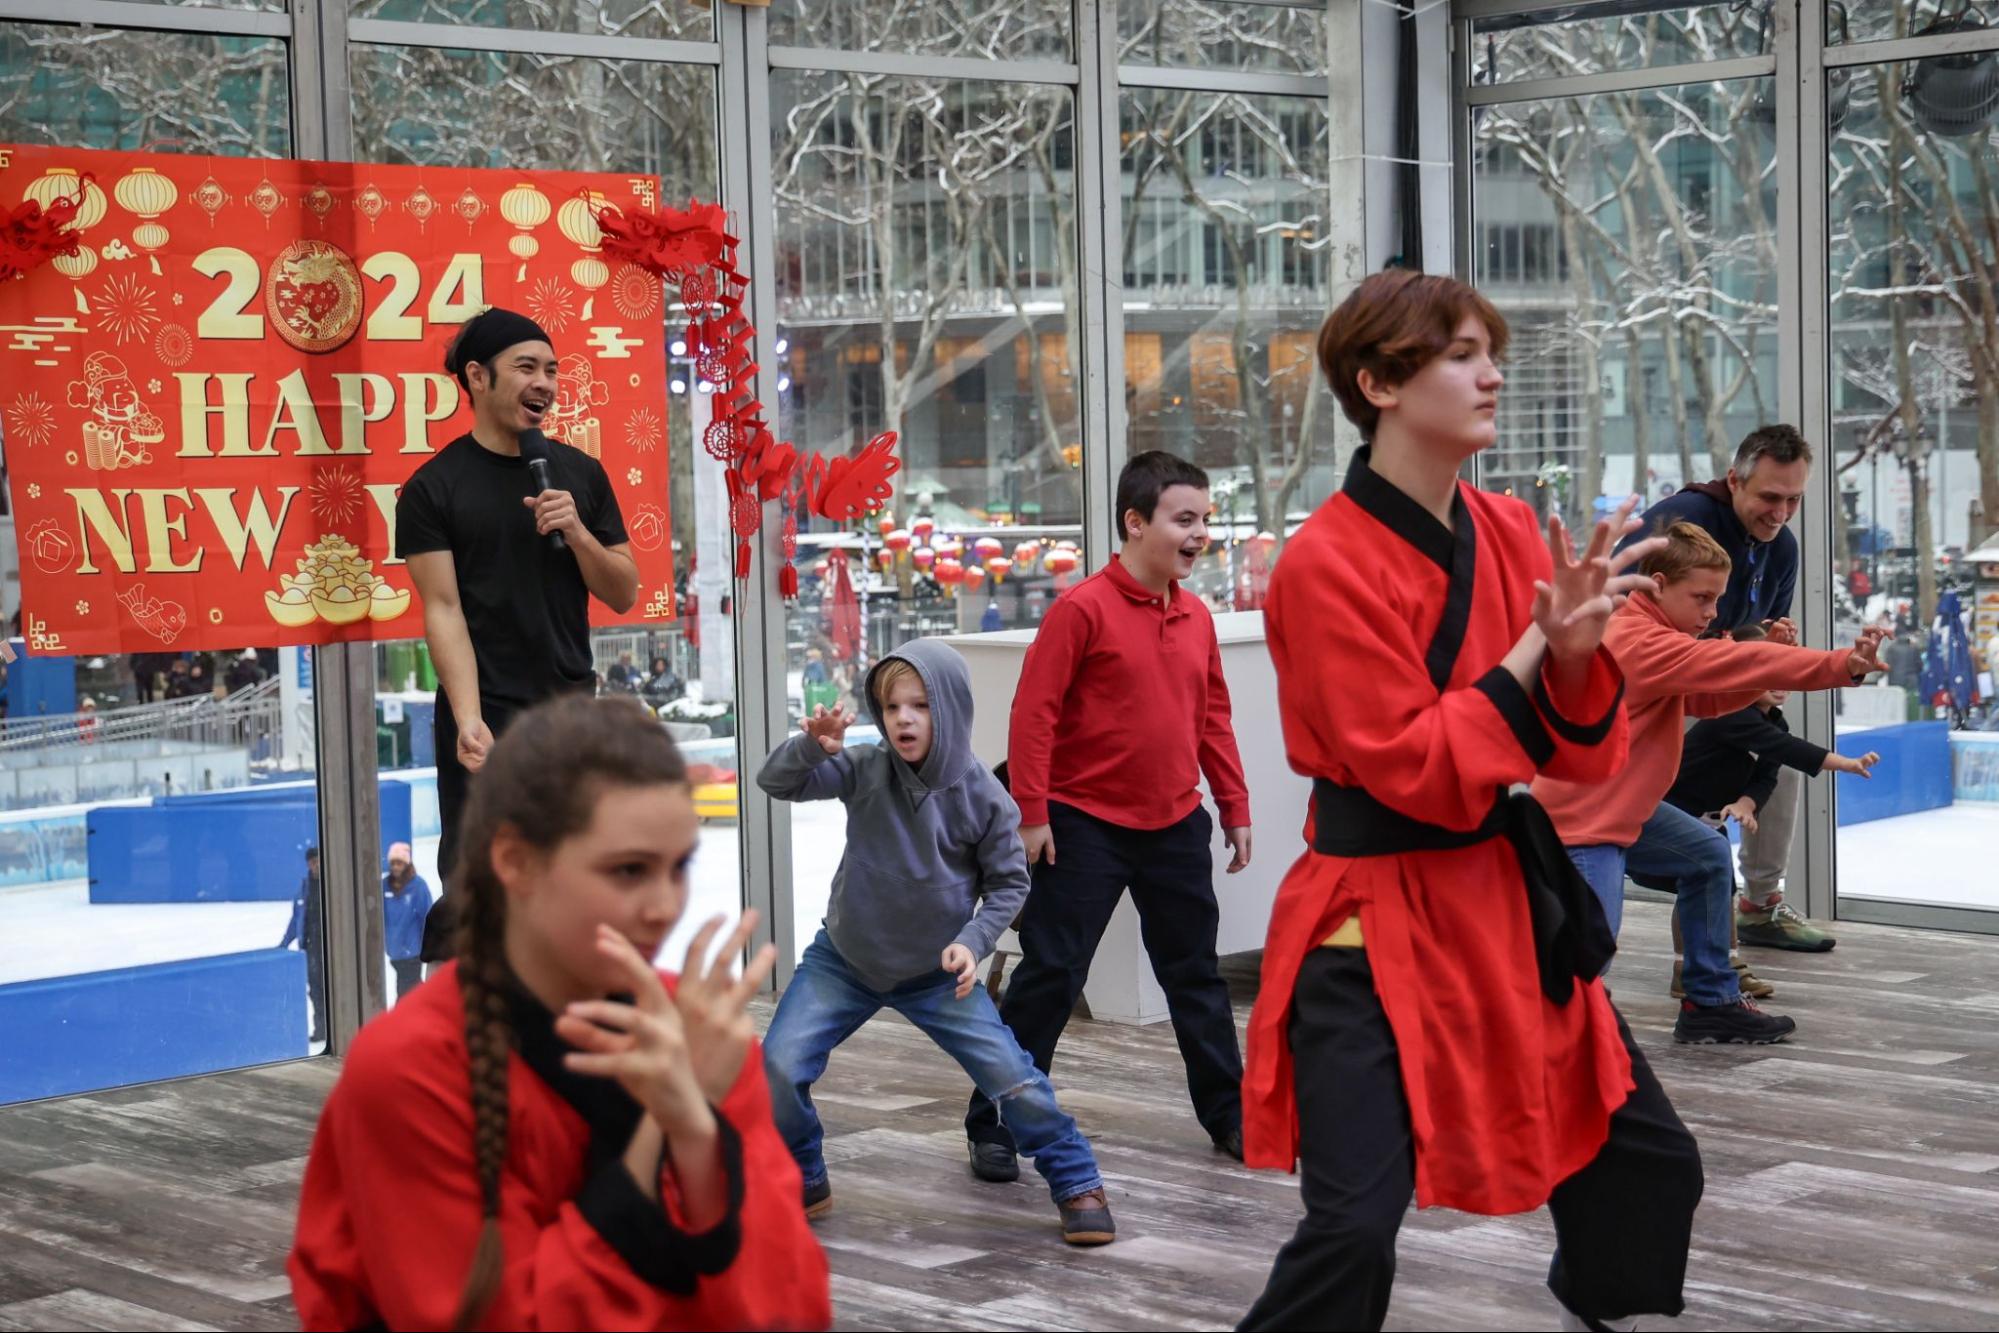 A group of people wearing red and black outfits doing Chinese martial arts in a room.